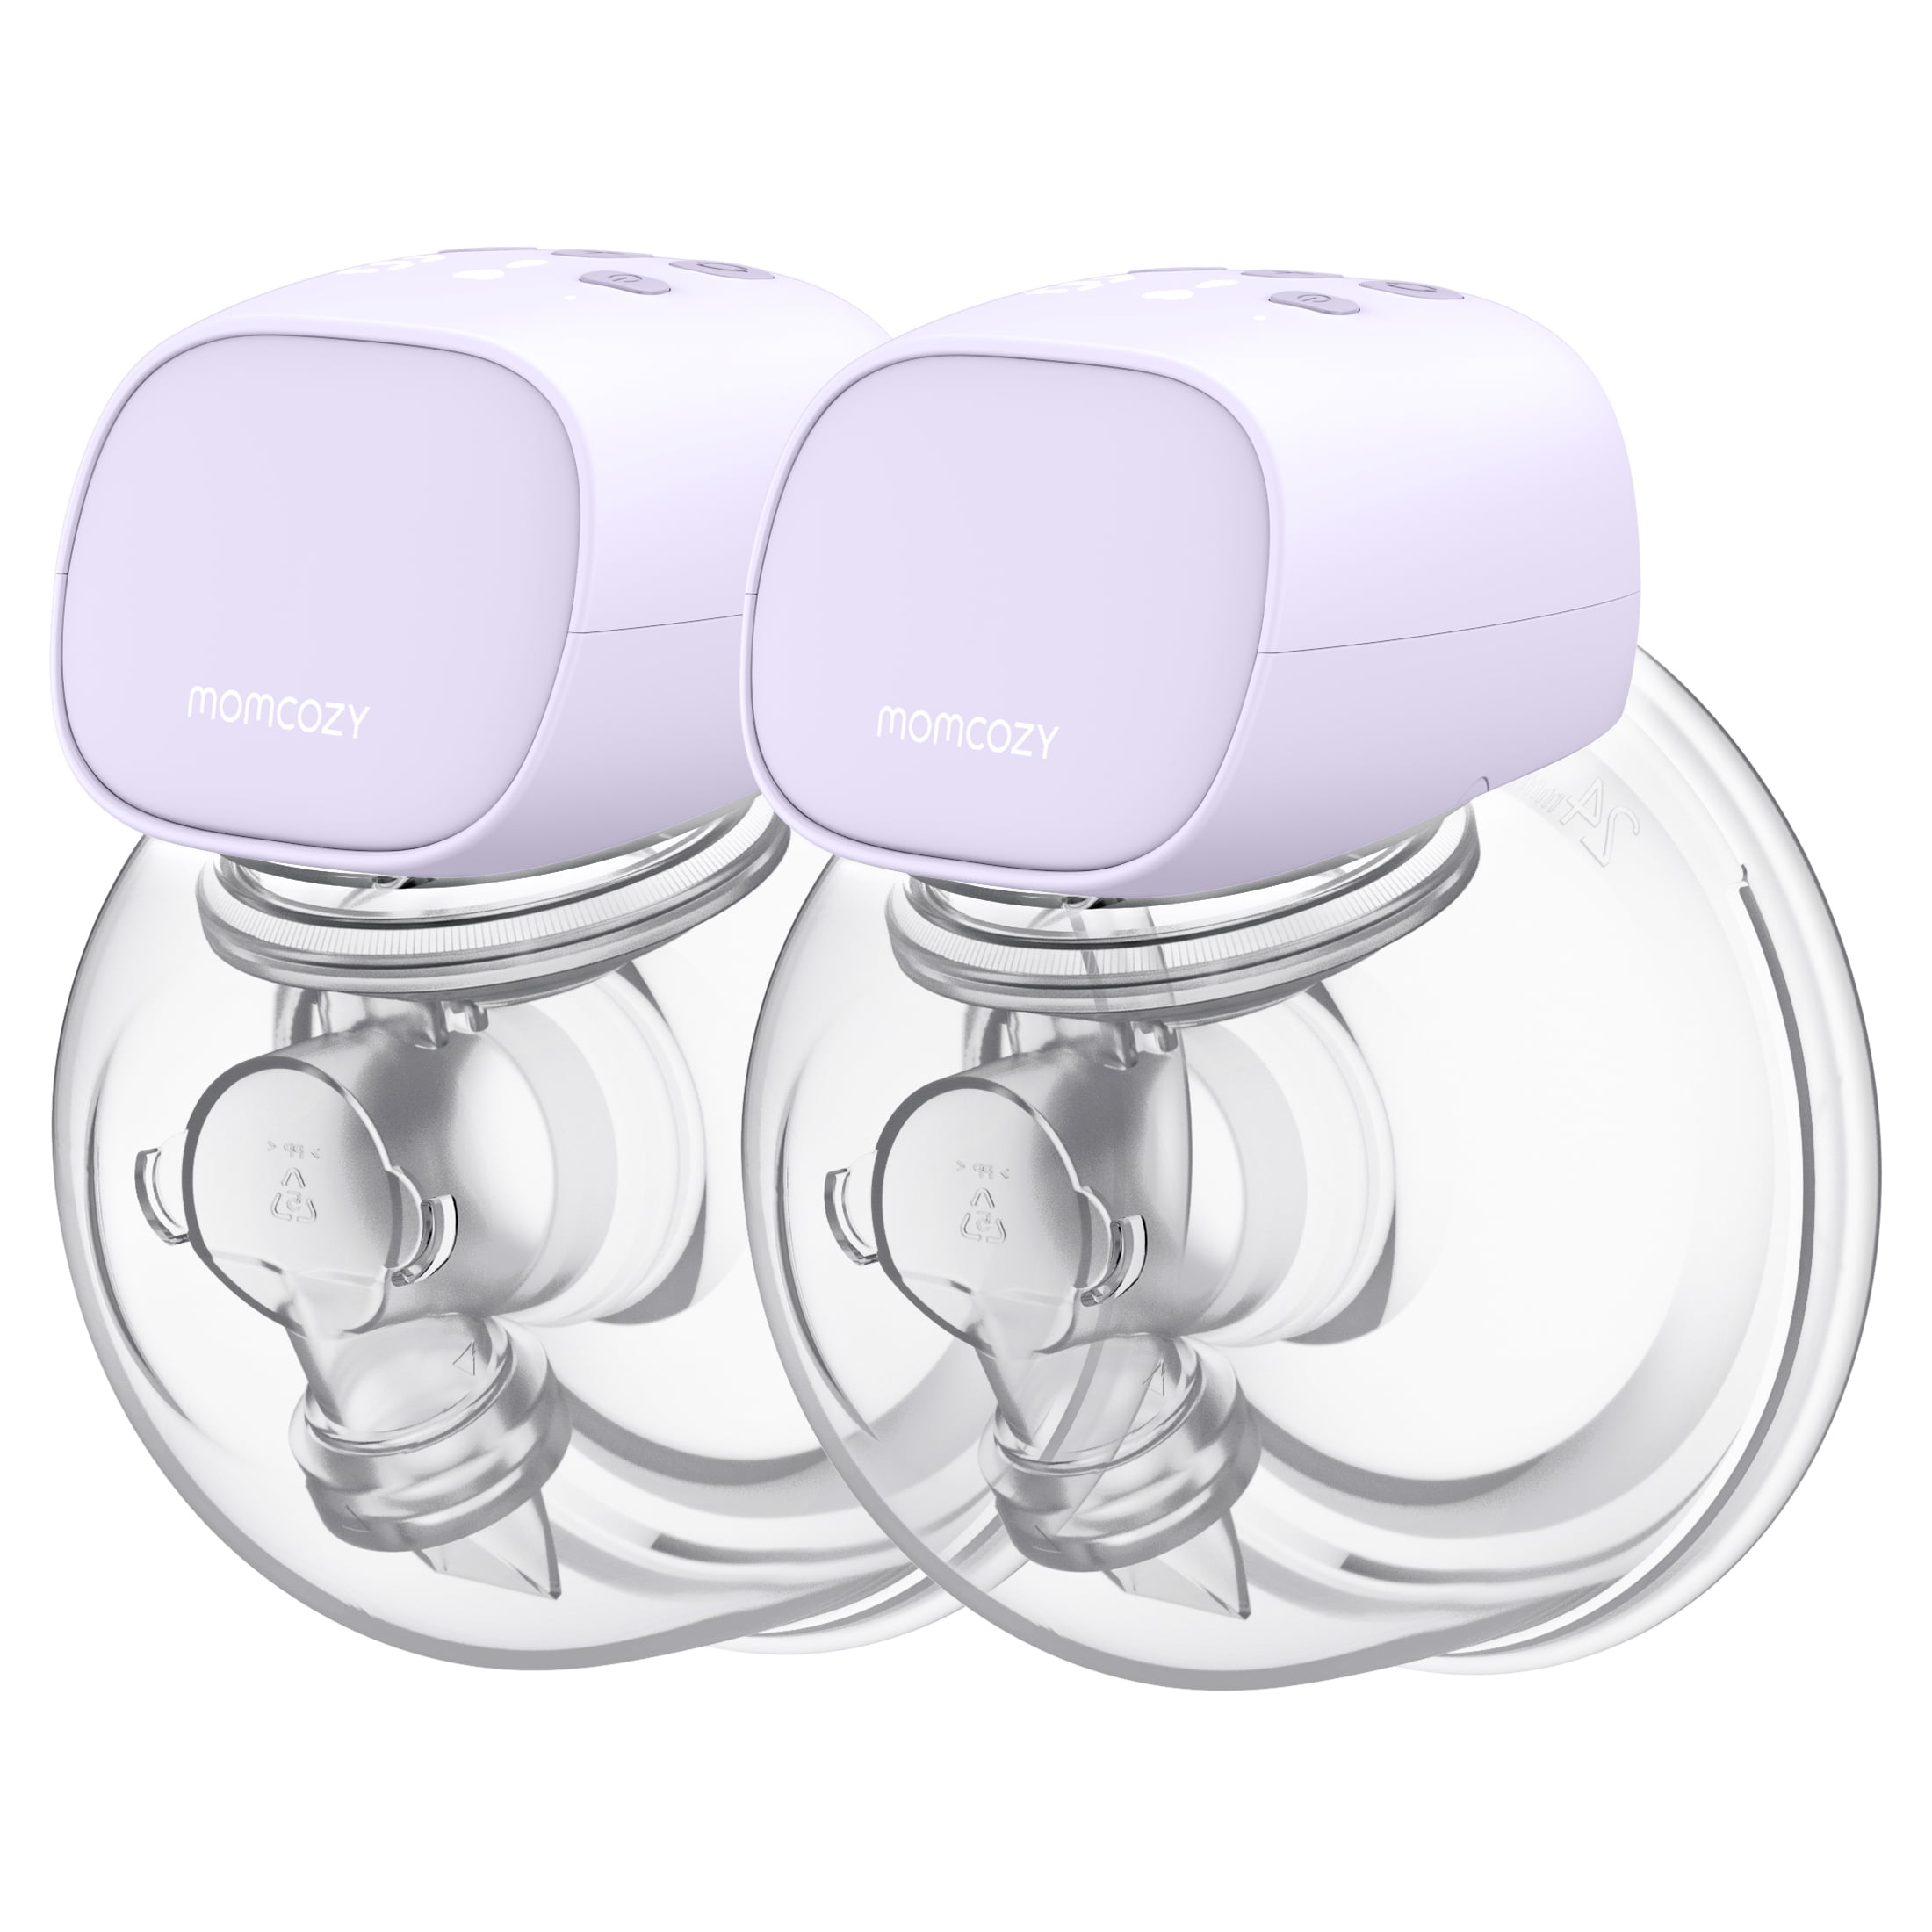 Momcozy Muse 5 Hands Free Breast Pump Wearable, Electric Breast Pump  Portable Purple 